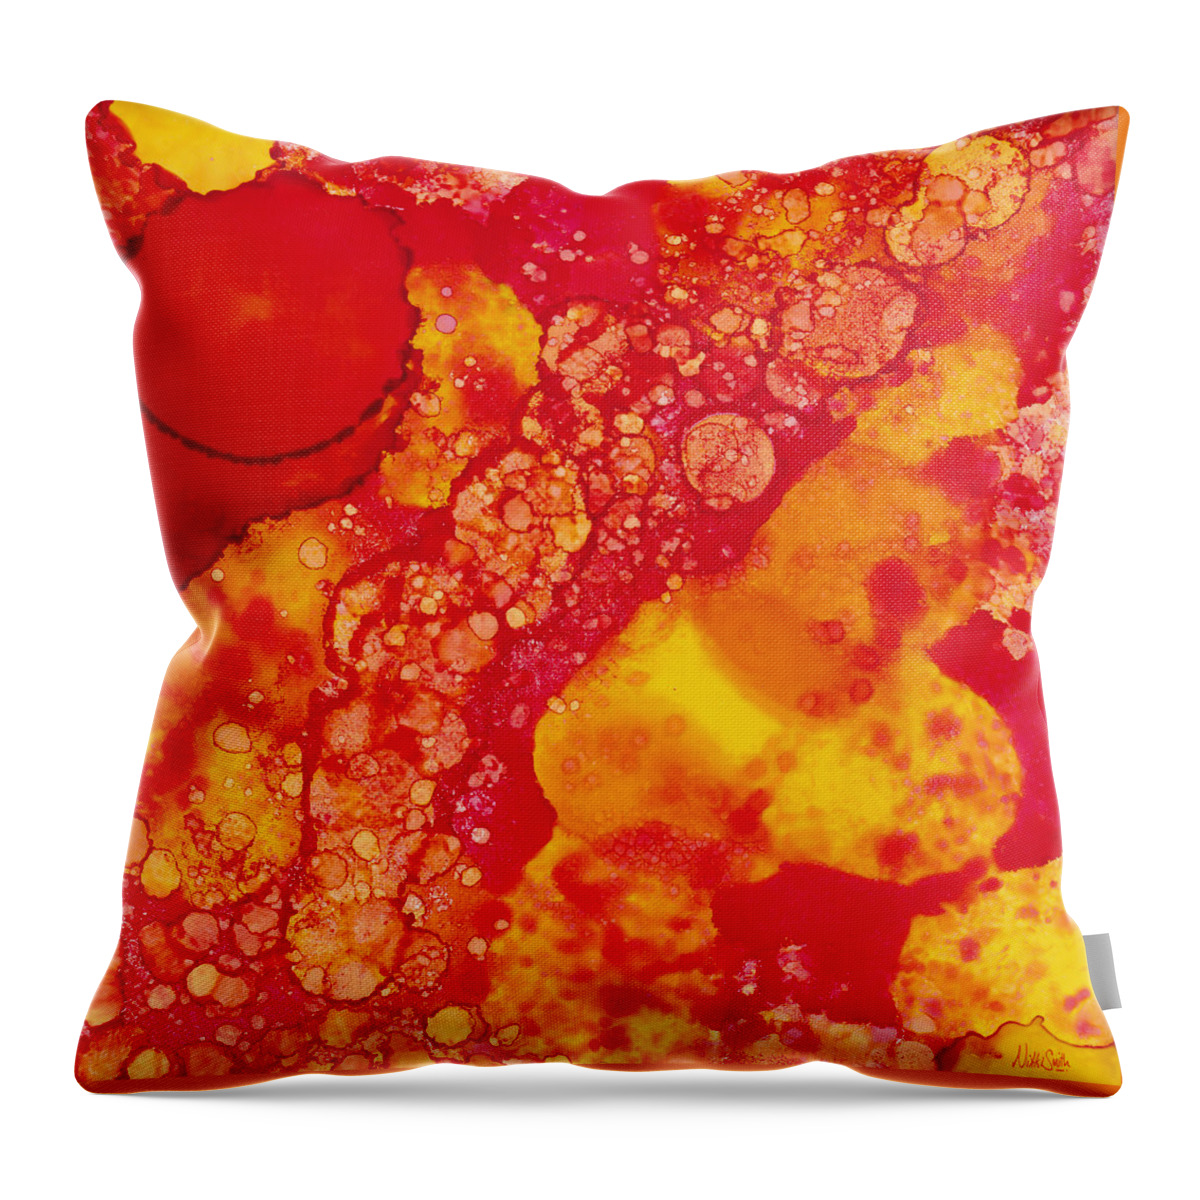 Red Throw Pillow featuring the painting Abstract Intensity by Nikki Marie Smith